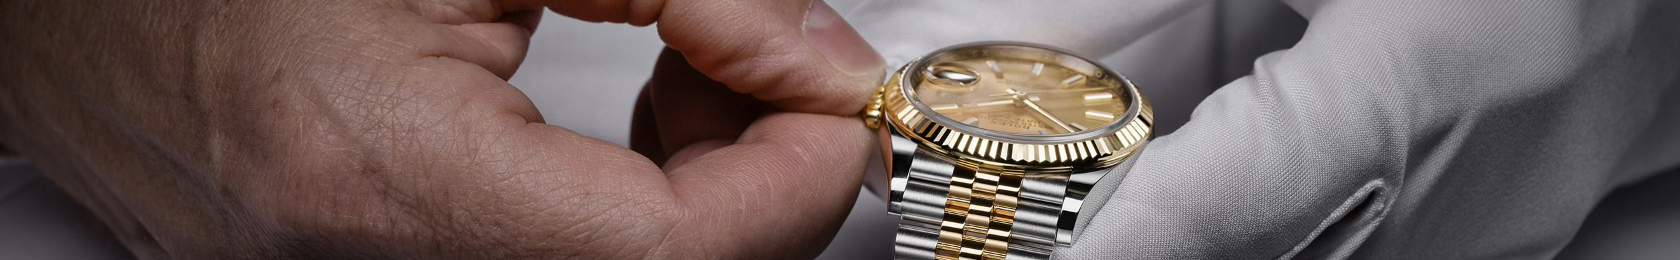 Servicing Your Rolex | Europe Watch Company